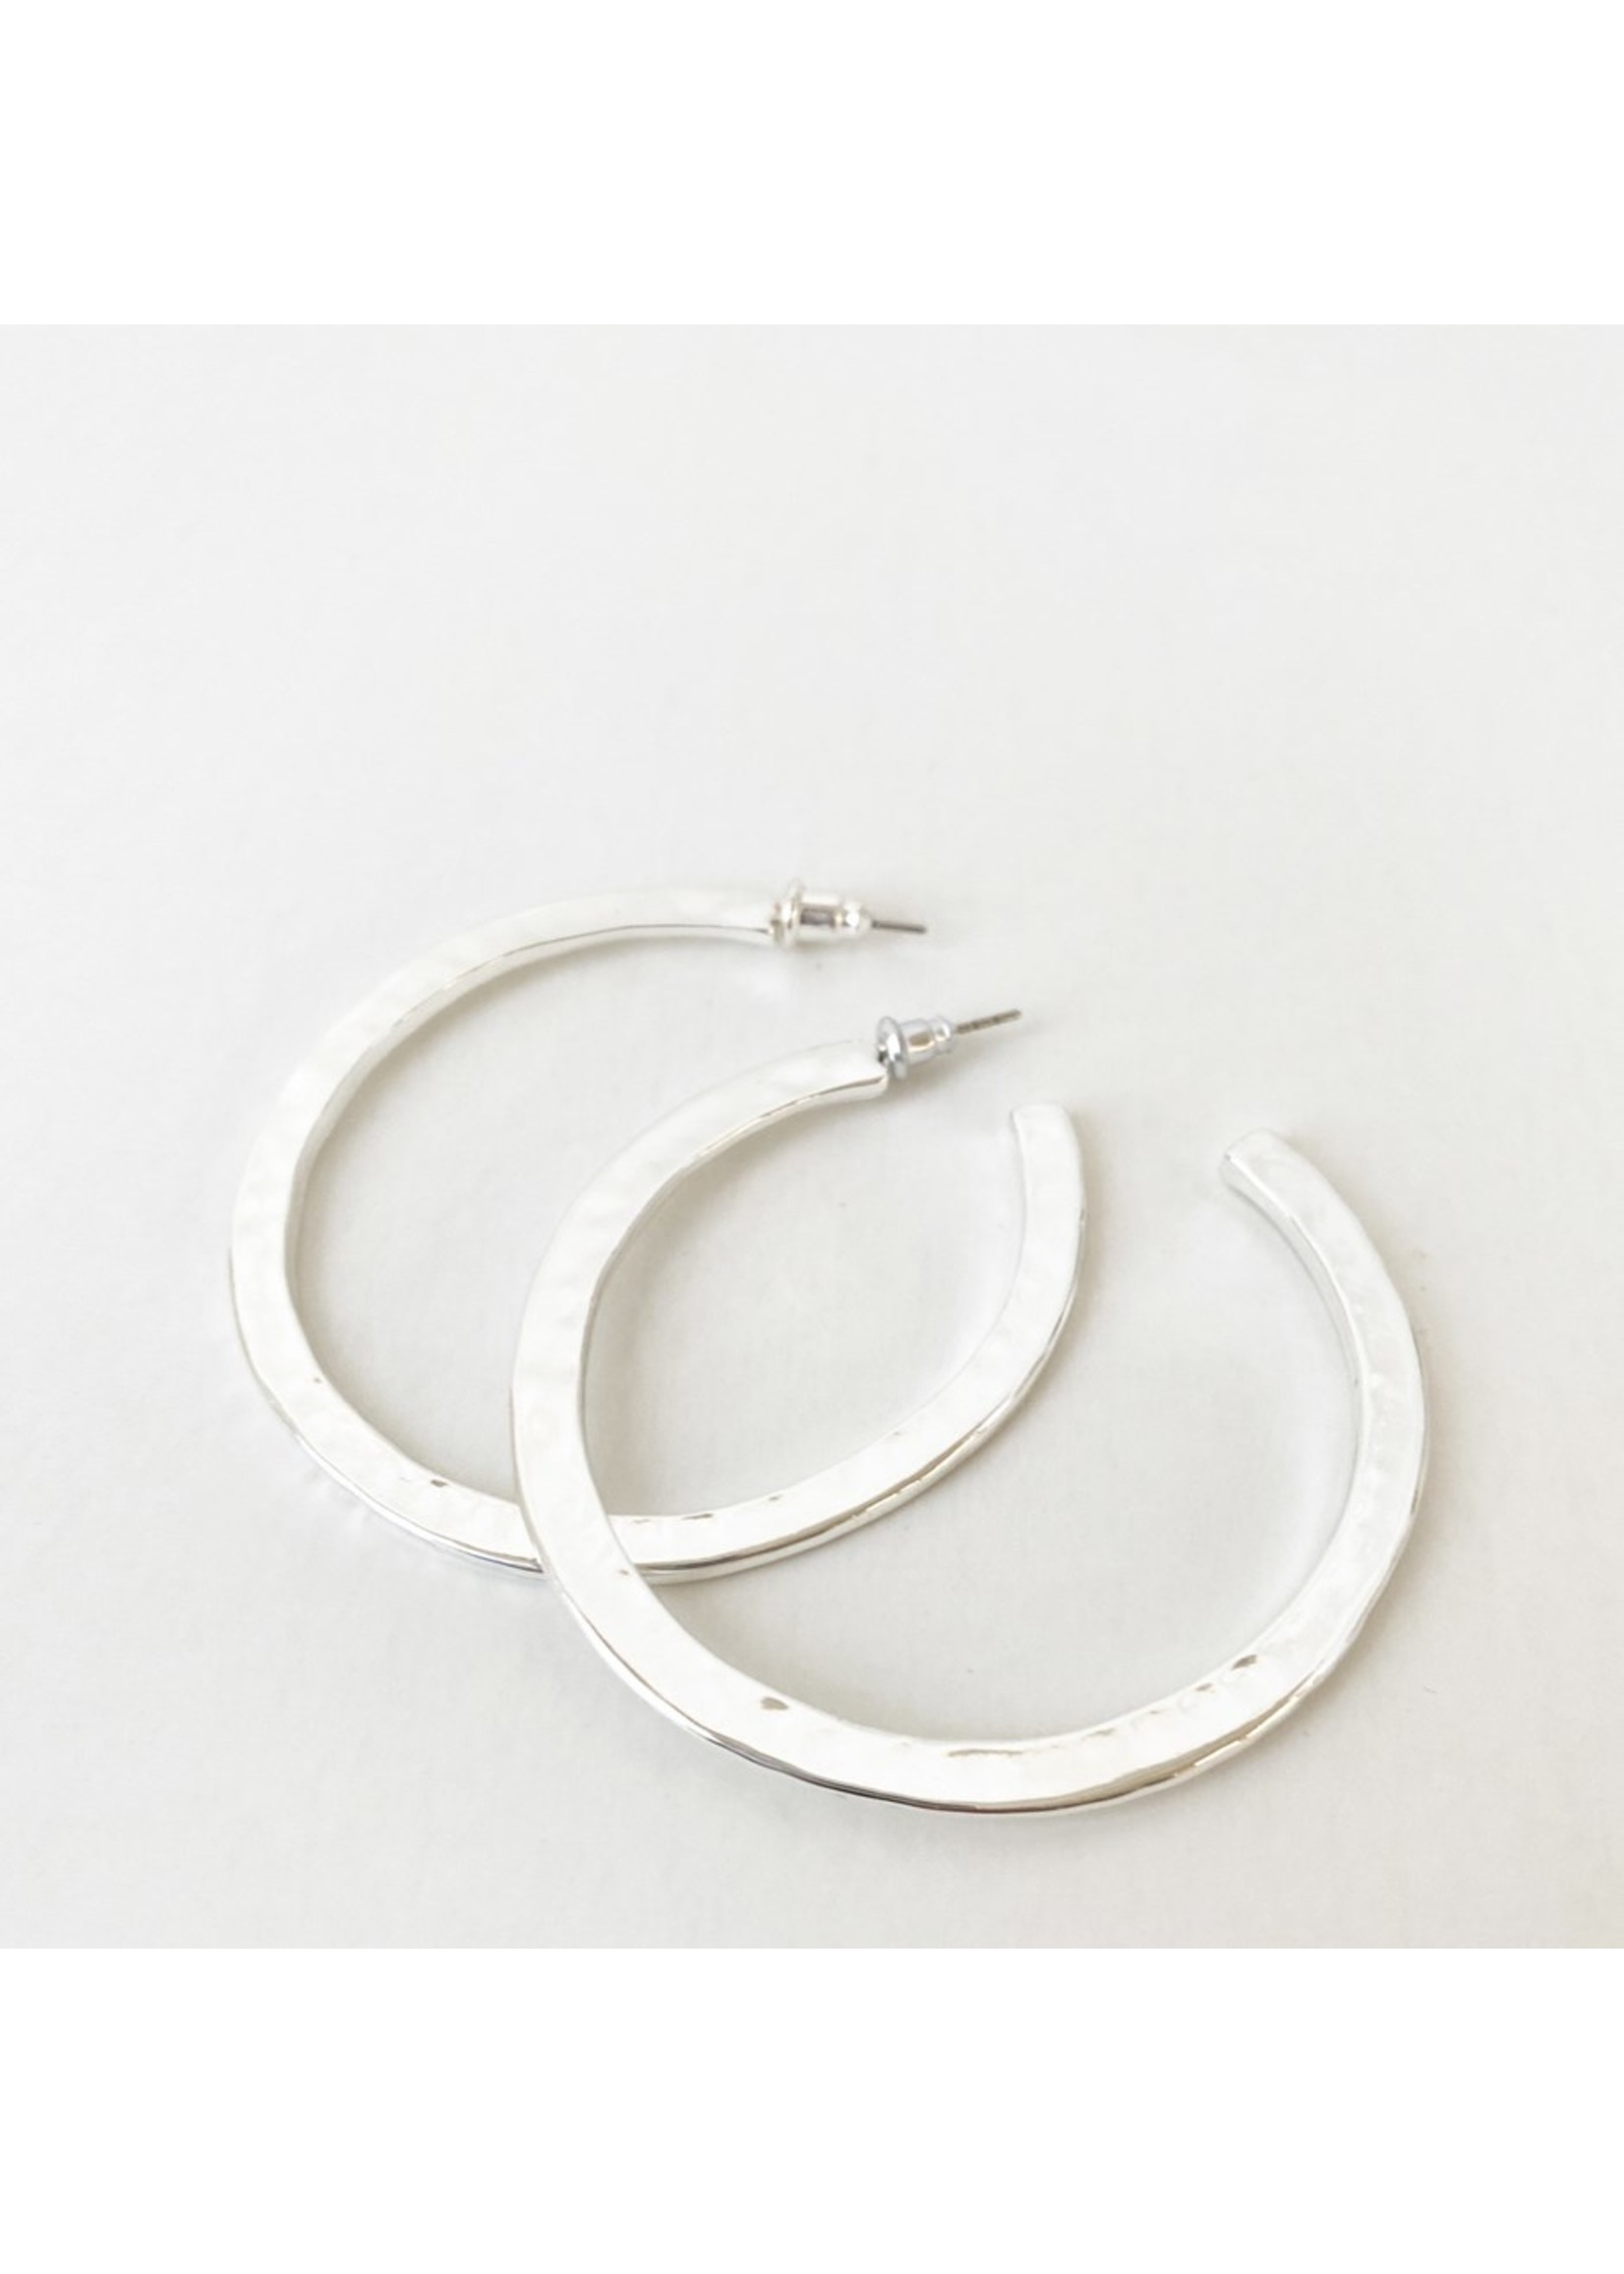 Flat Hammered Hoops